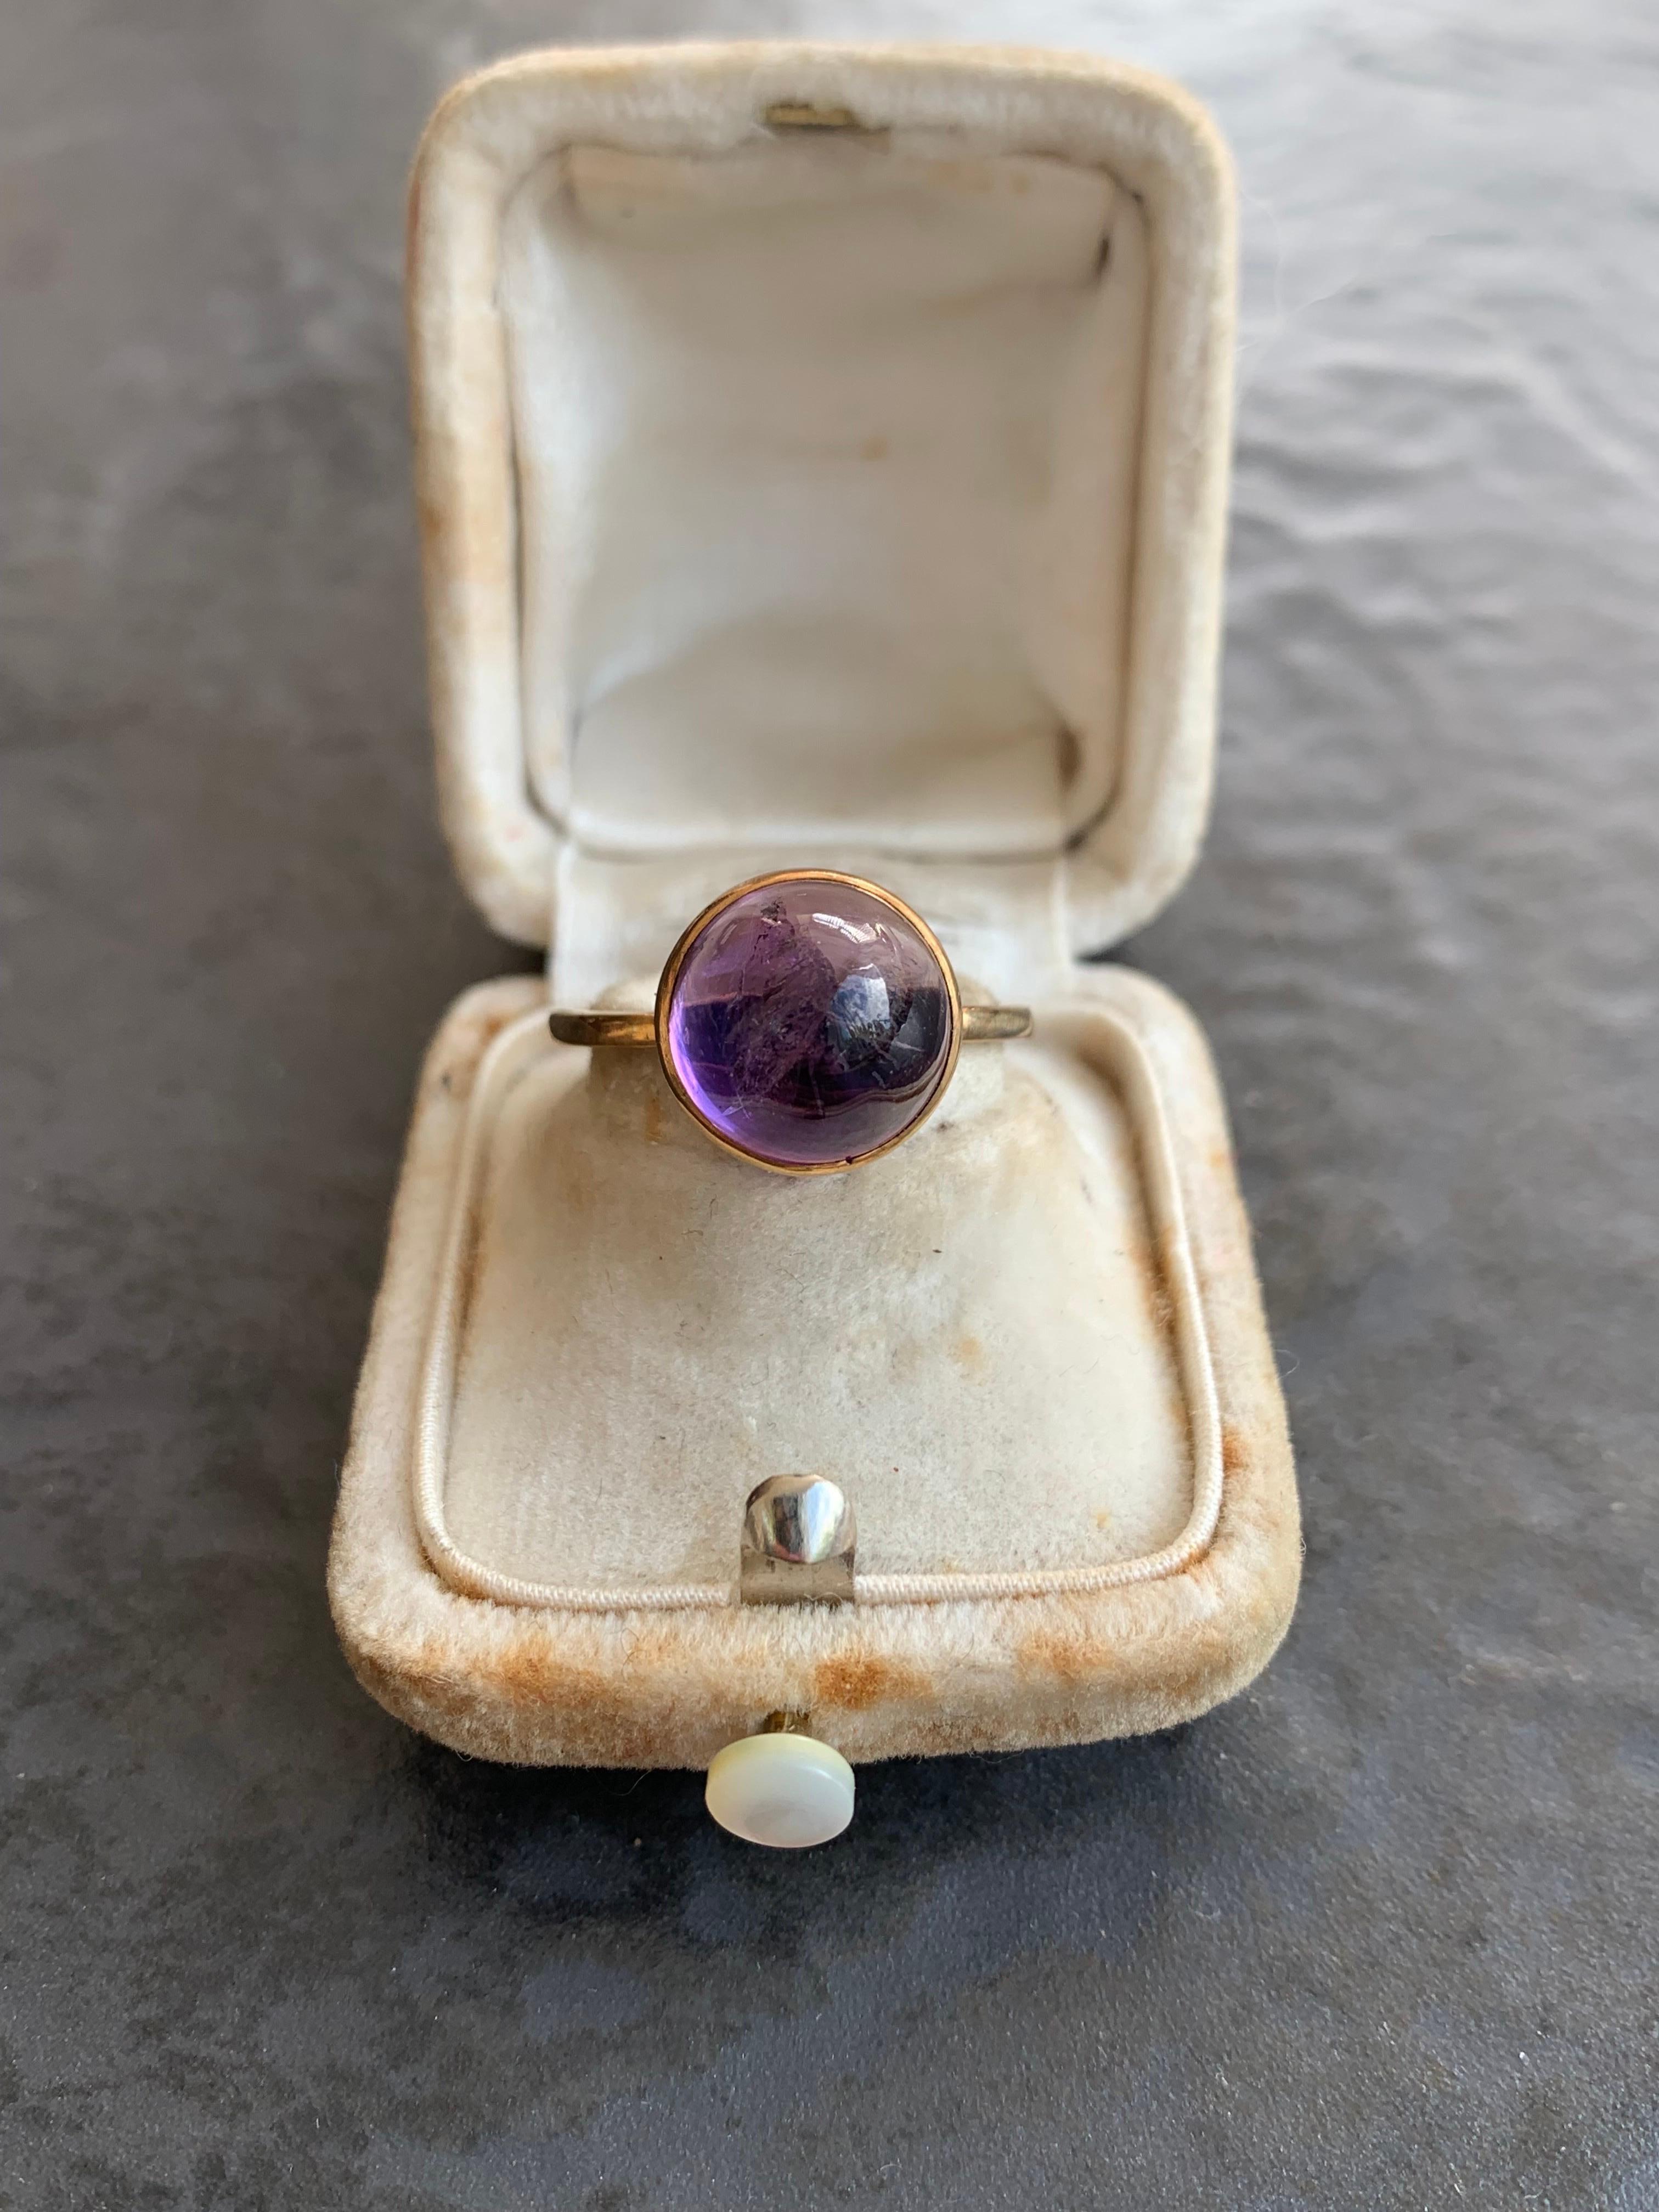 Art Deco Antique Cabochon Amethyst Cocktail Ring in 9ct Yellow Gold